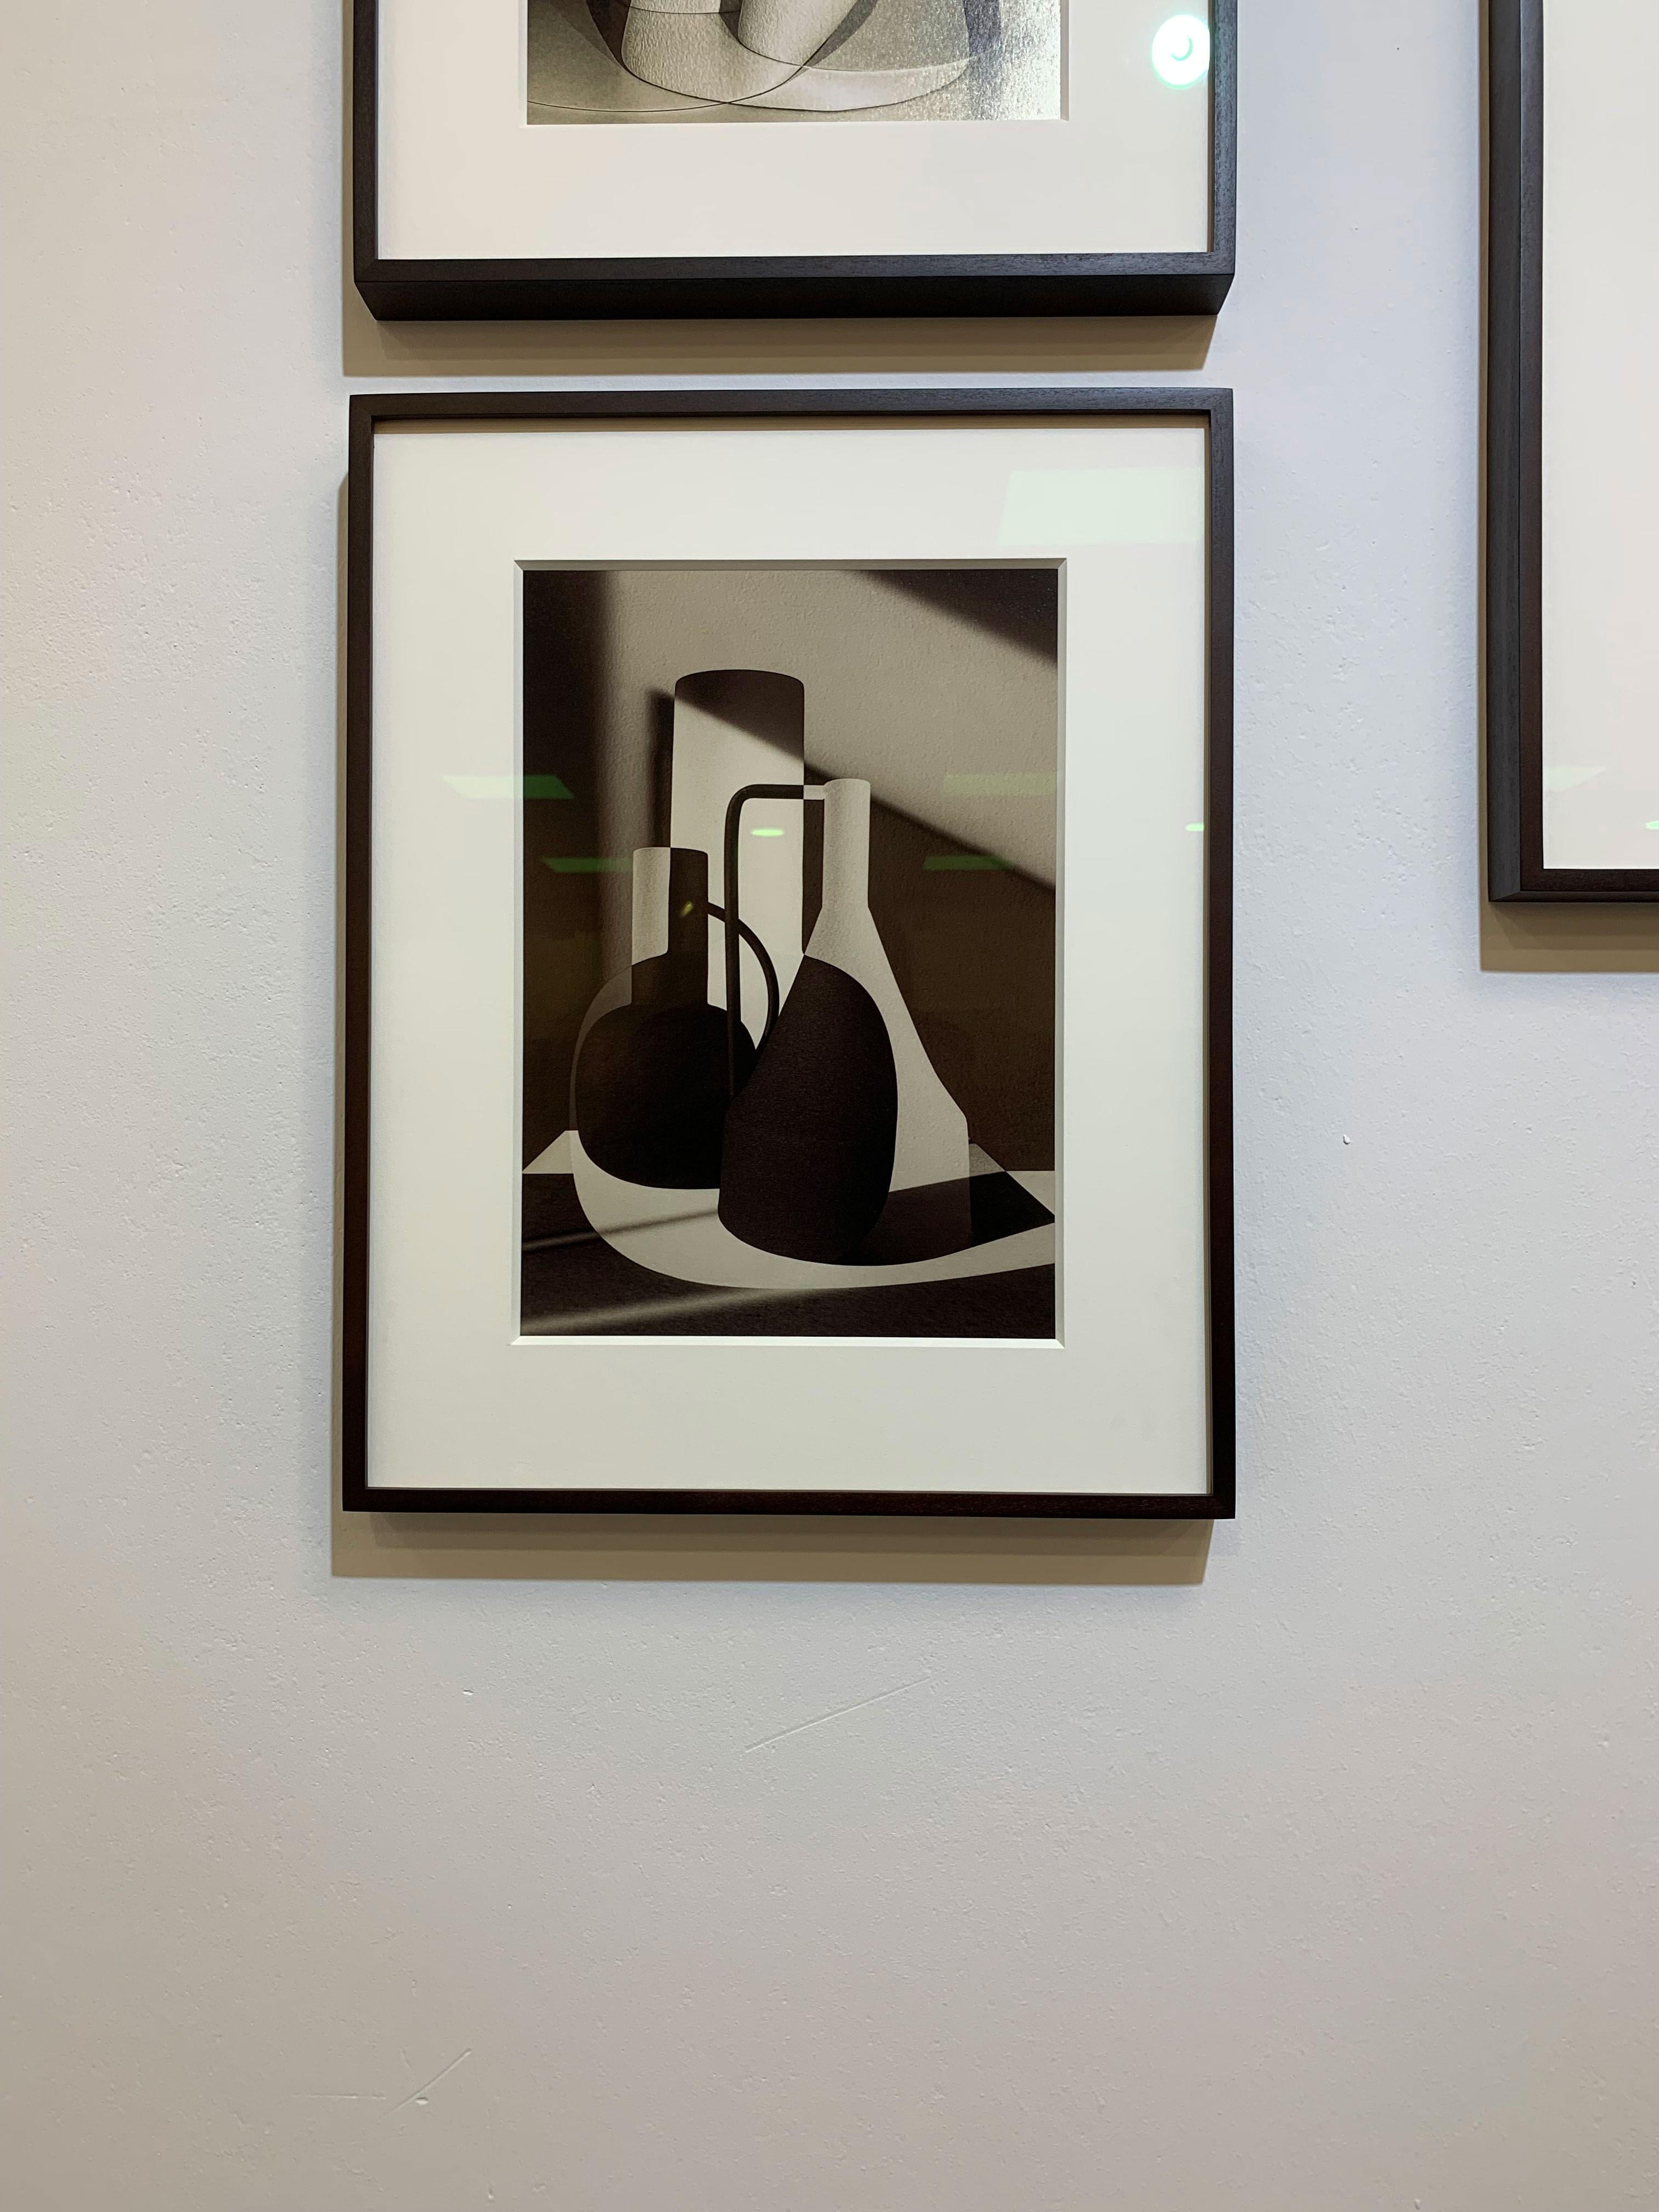 In Between the Shadows - Cubist Print by Sander Vos